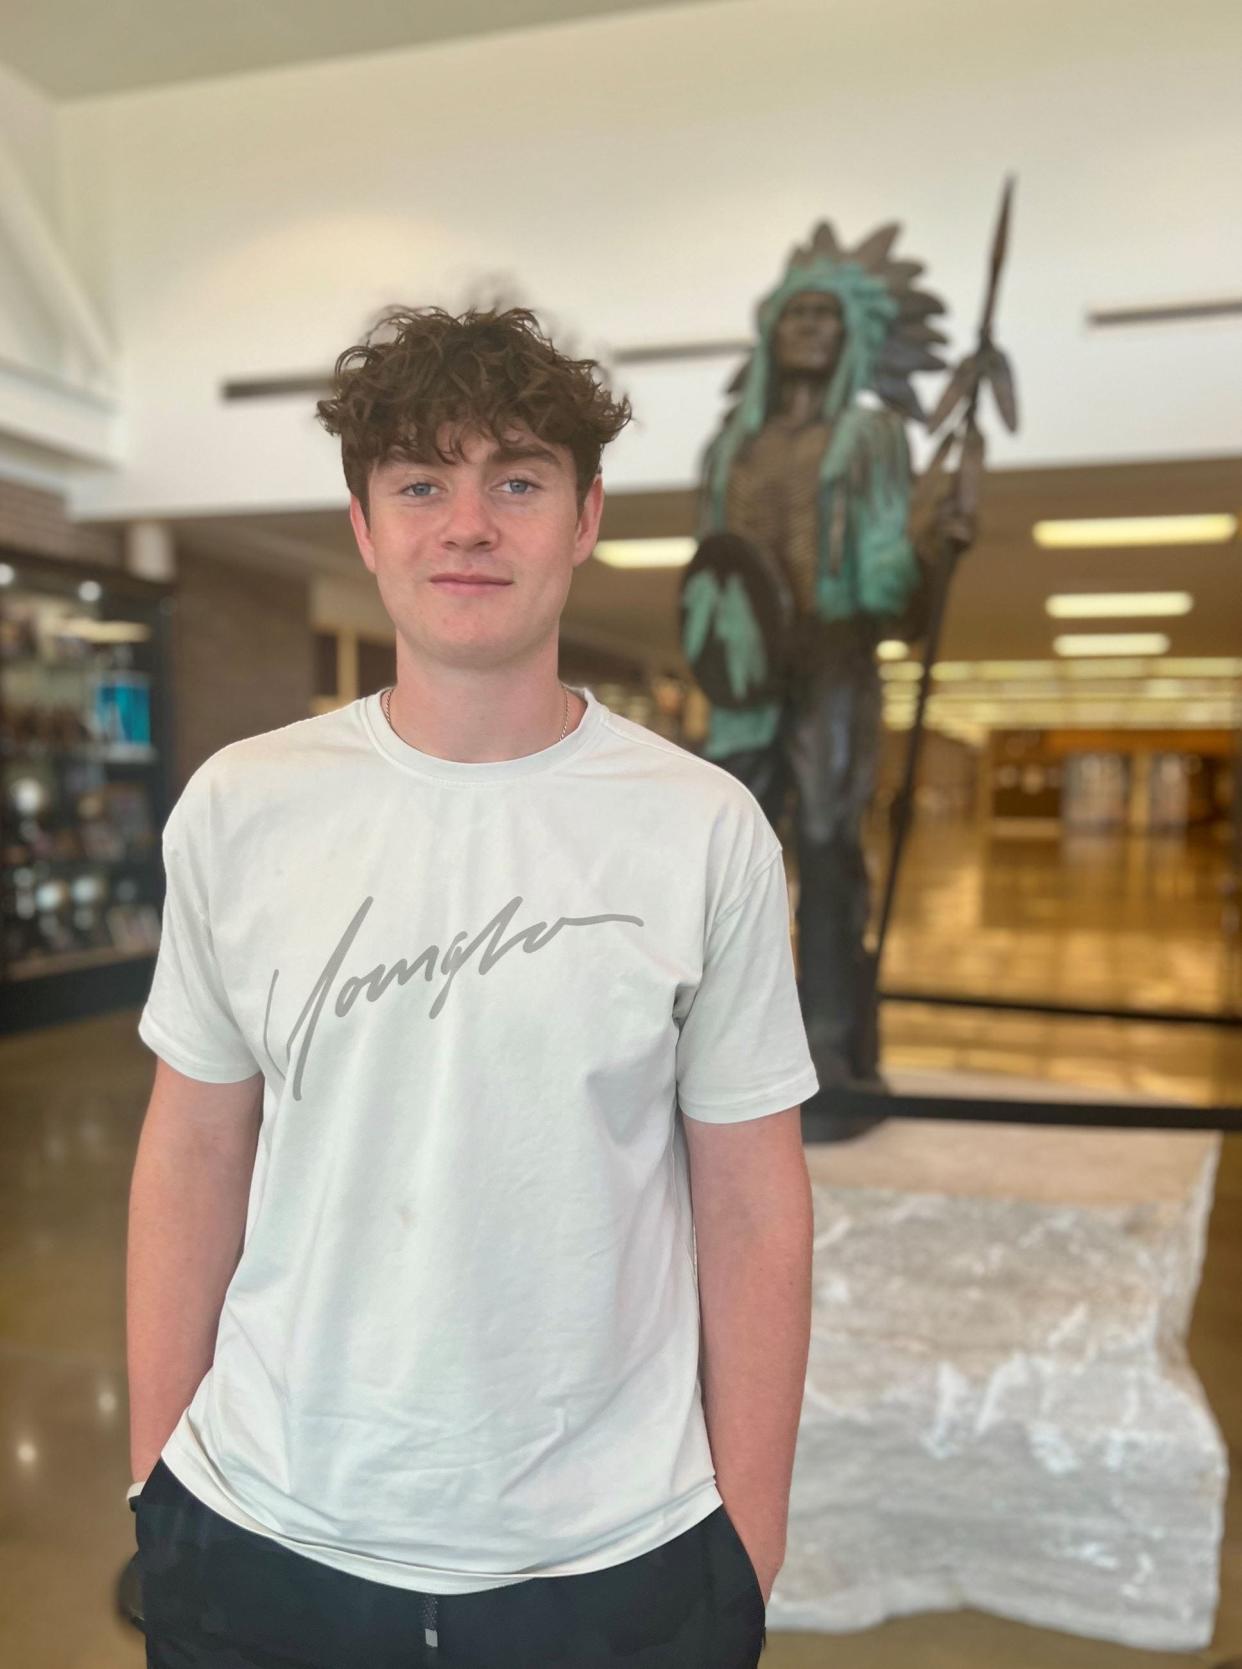 Will Blaine received the $1,000 Build My Future scholarship The Kickapoo High School senior will attend Missouri State University, focusing on the construction industry.